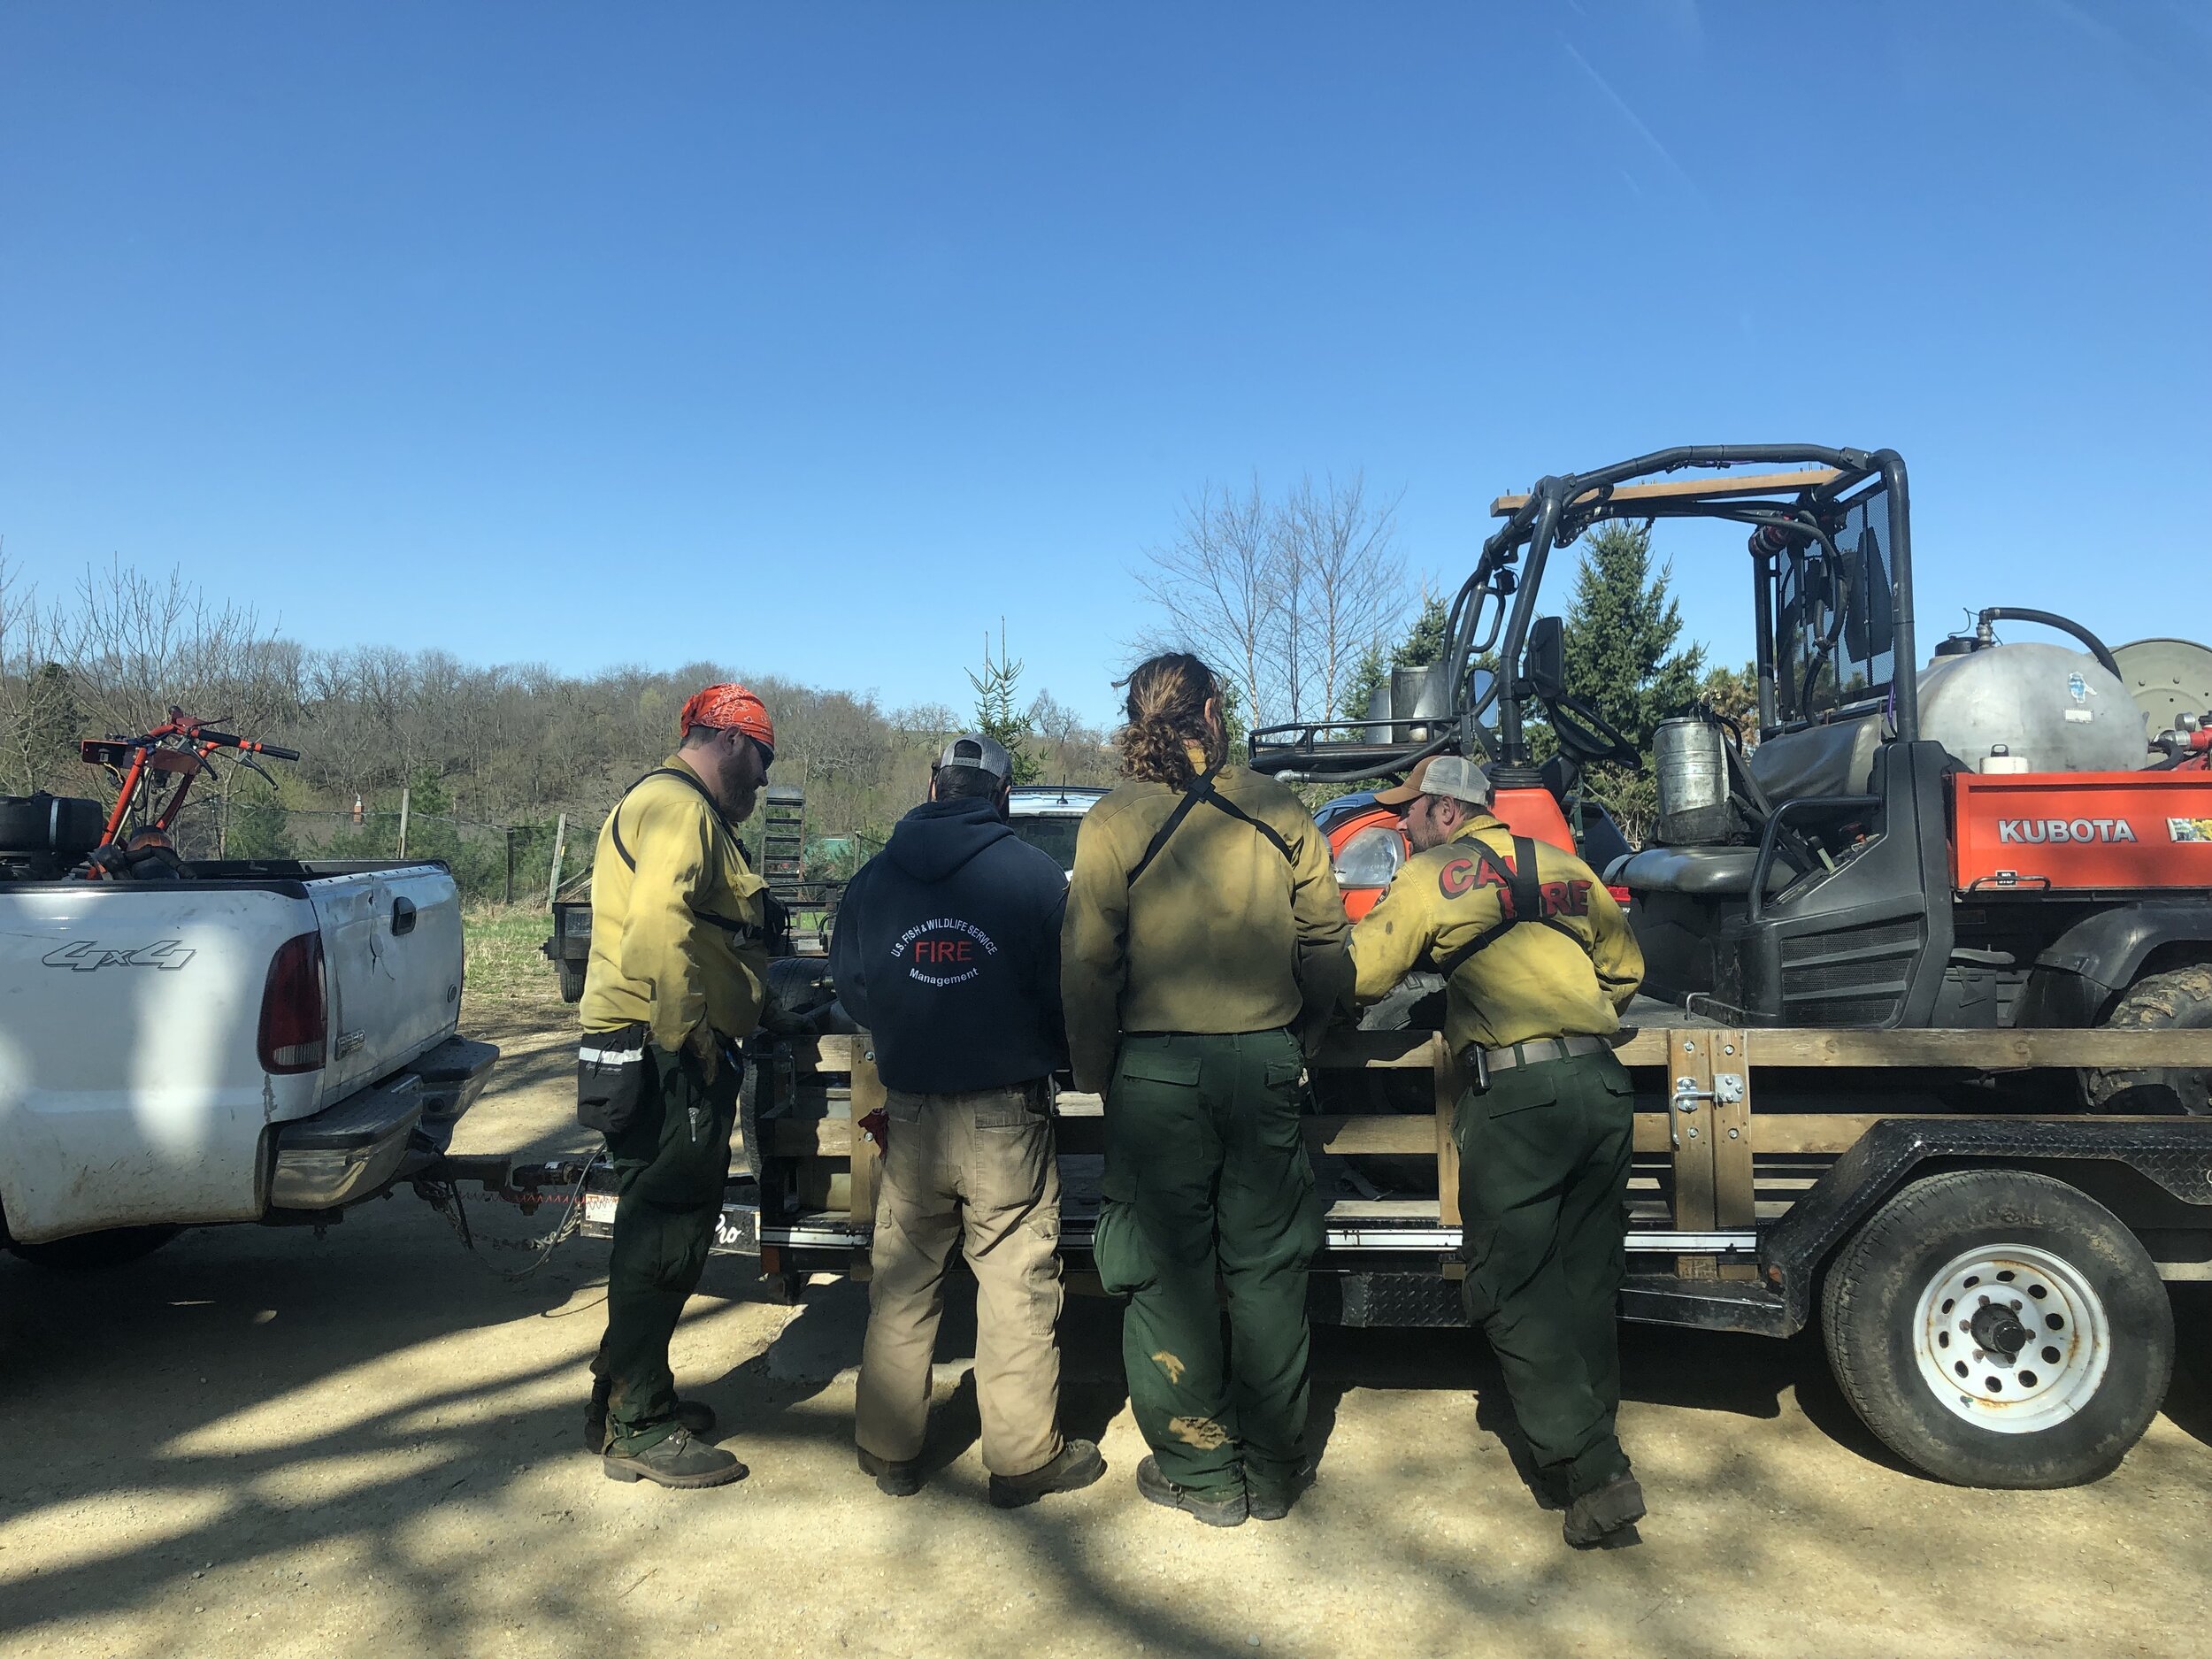  A crew of 2-12 firefighters arrives on site equipped with proper gear and equipment needed to safely and efficiently conduct a prescribed burn and contain the fire.   